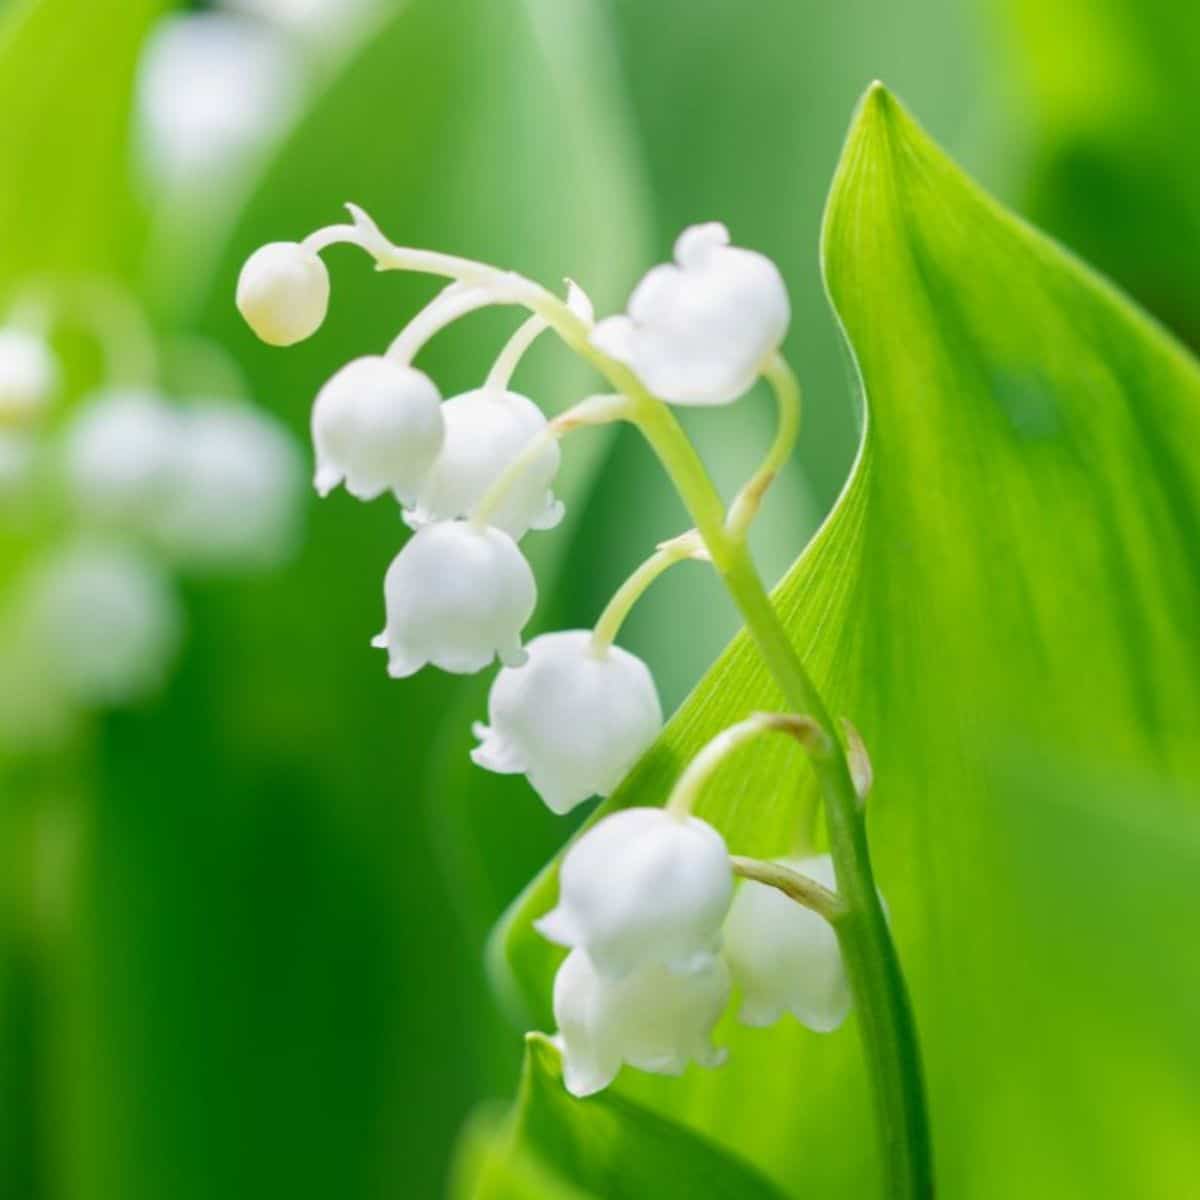 10 Lily of The Valley Bulbs for Planting, Lilies of The Valley Plants  Perennial, Lily Flower Bulbs Roots Outdoor Garden